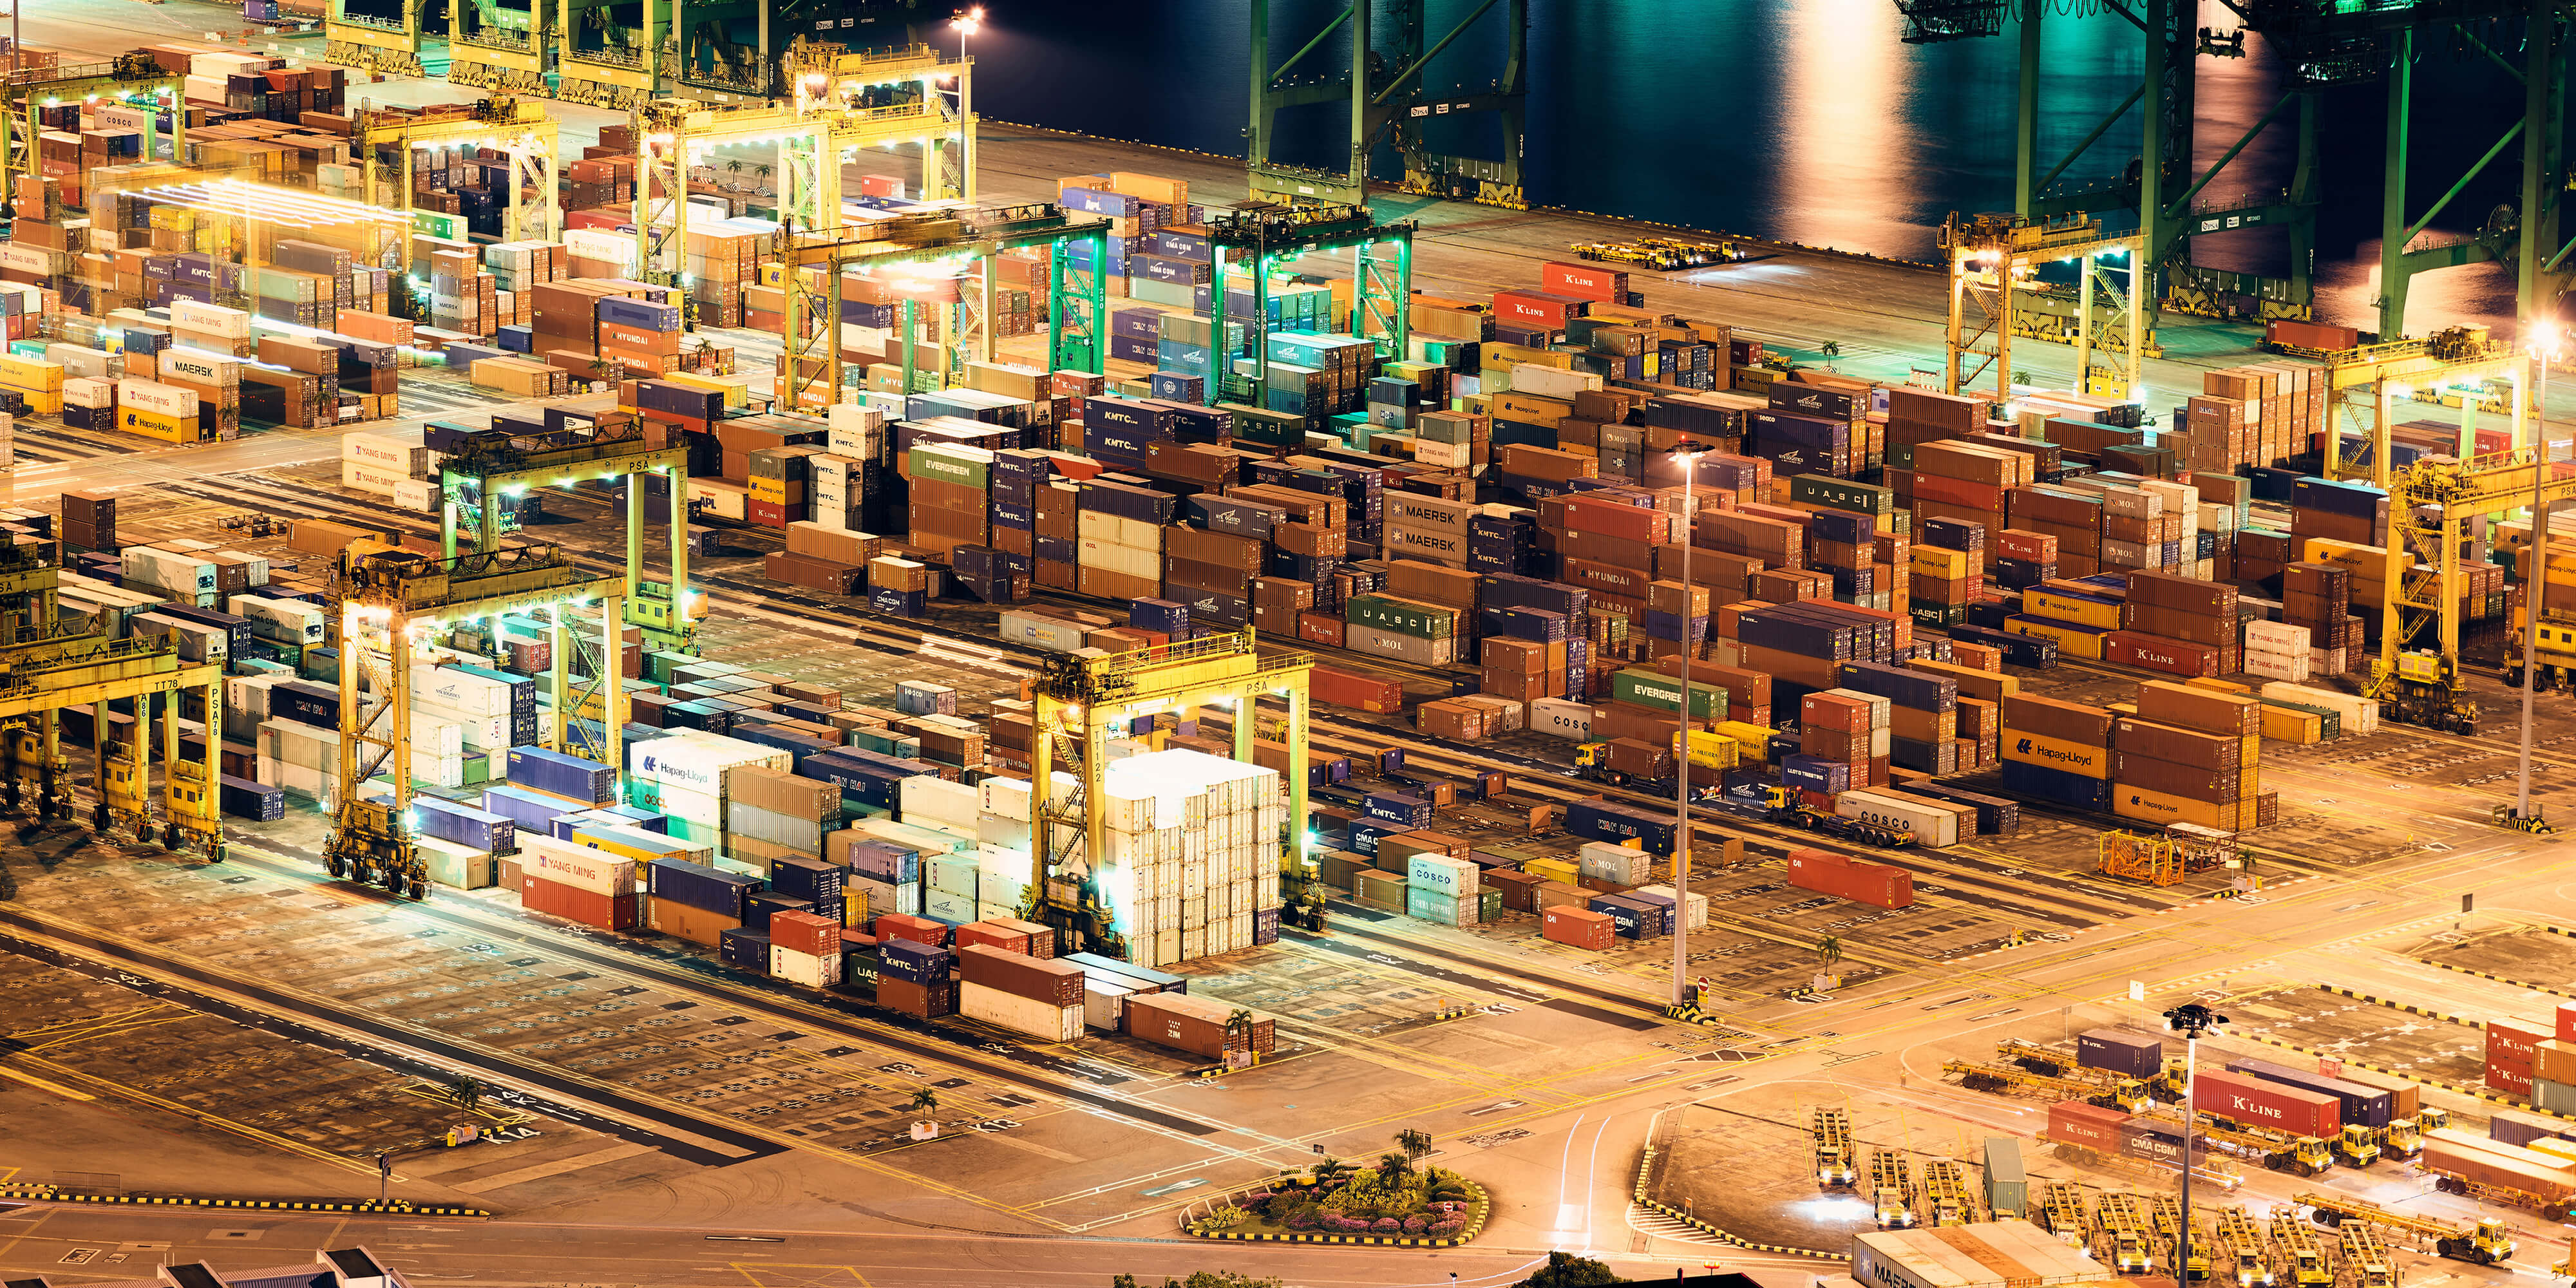 Nigh time view of shipping containers at a port